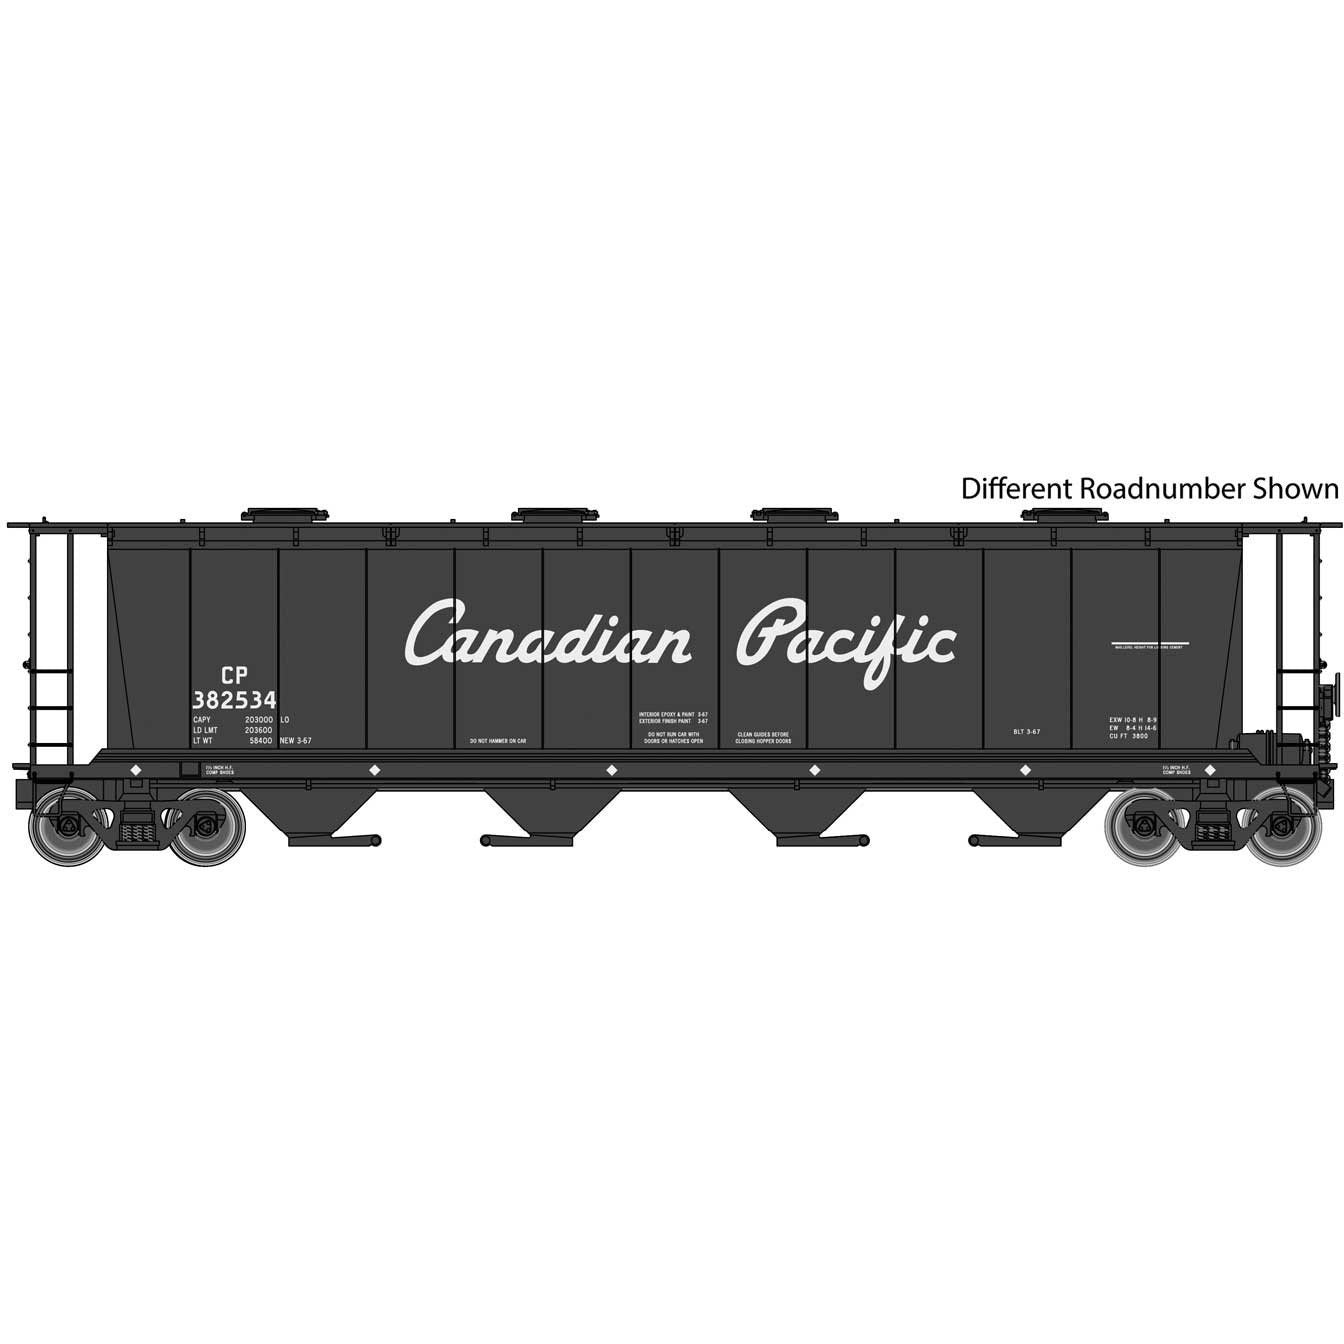 59' Cylindrical Hopper - Ready to Run -- Canadian Pacific #382799 (black, Script Name)